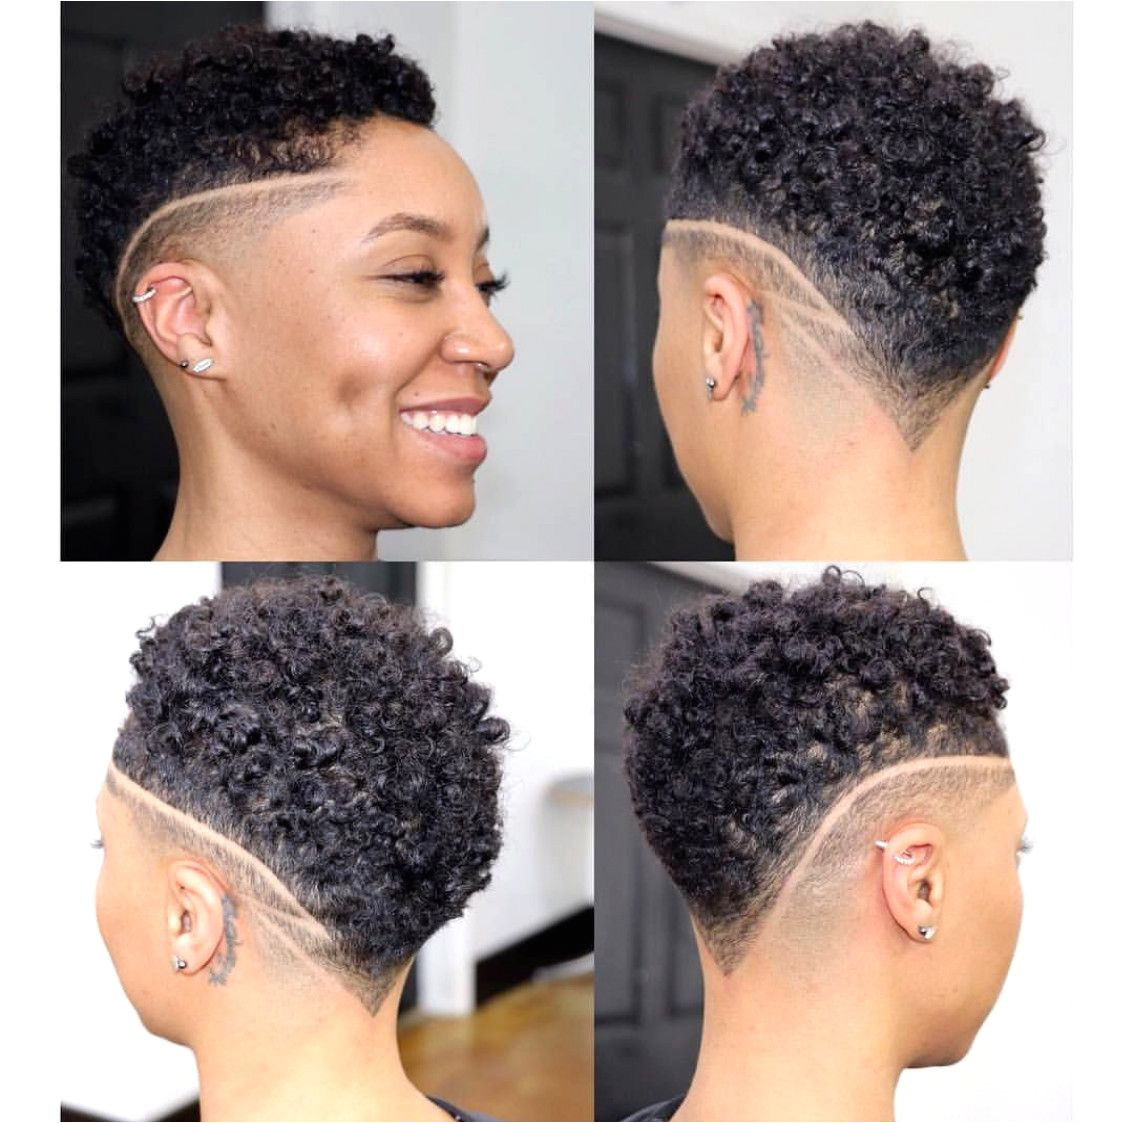 This natural curly Hairstyle Haircut with your sides faded along with a chic design allows